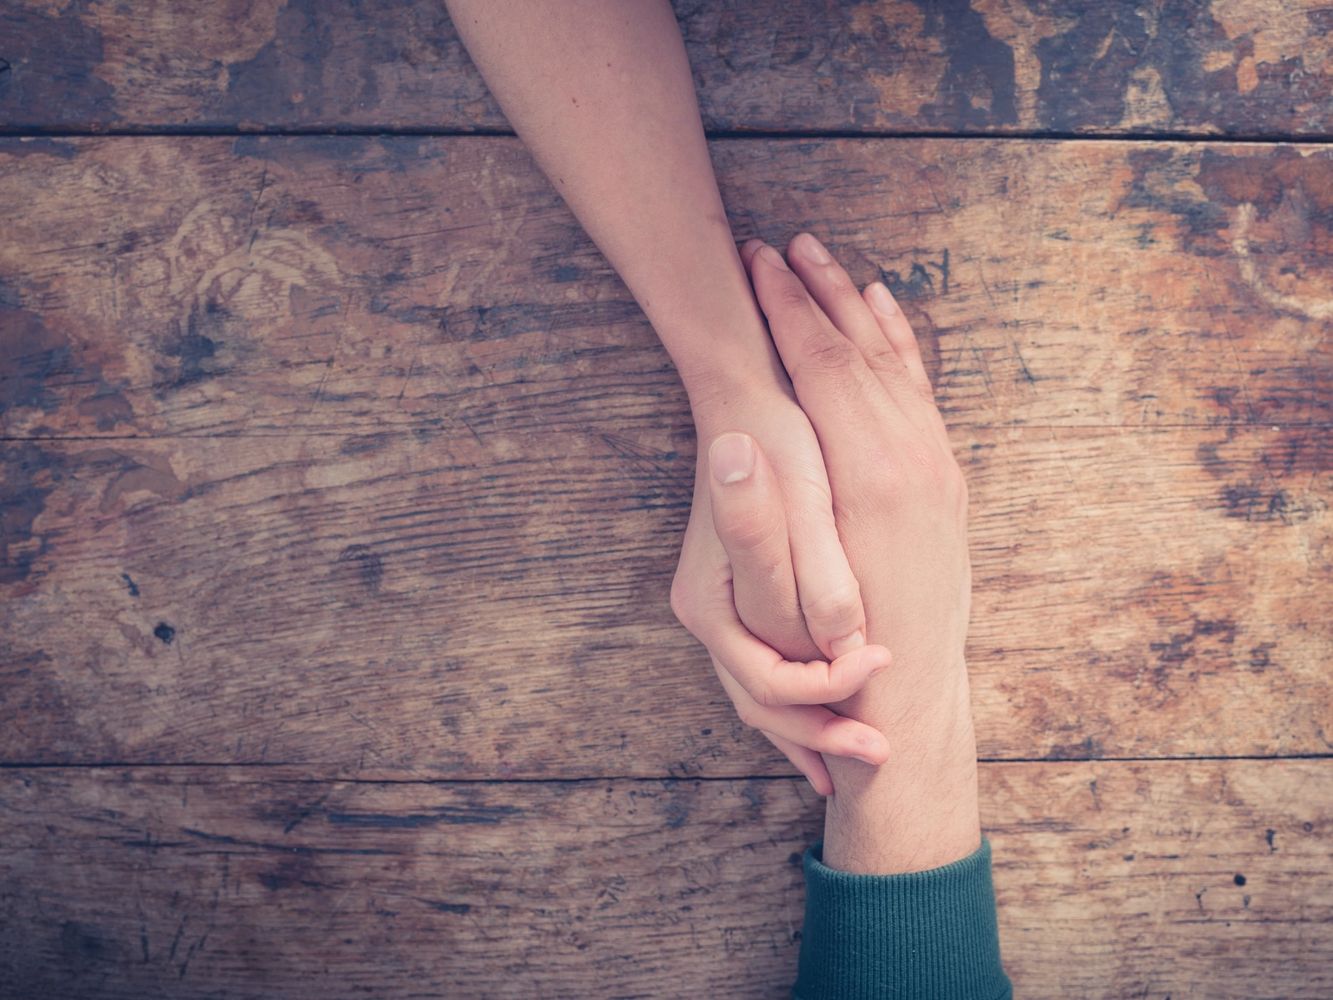 Anxiety & Trauma Clinic of Nova Scotia holding hands picture